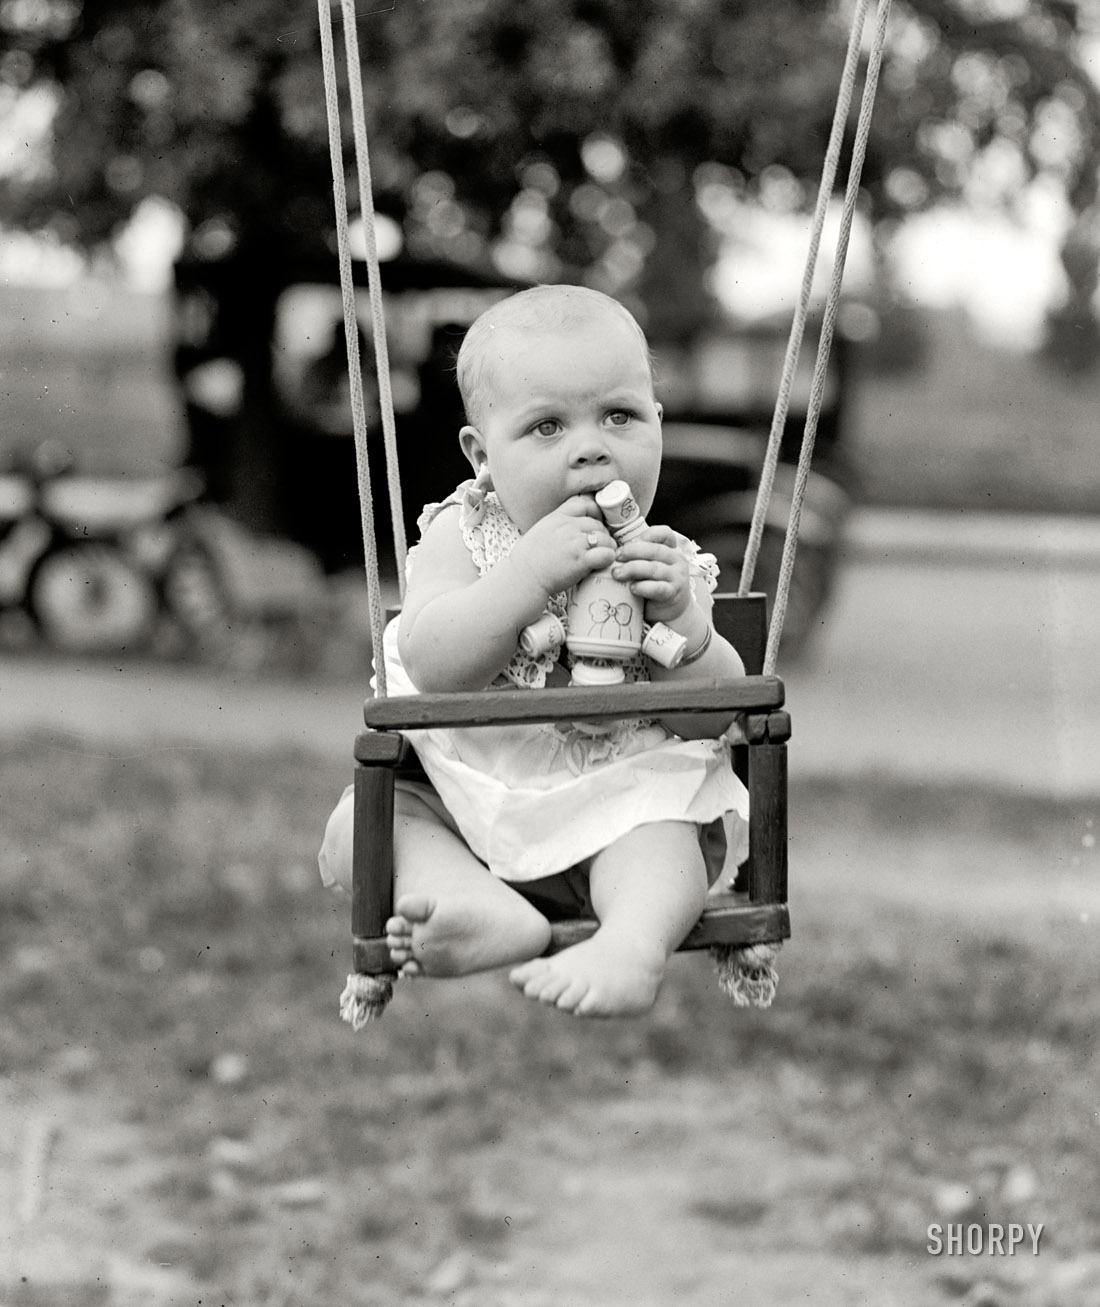 August 29, 1922. Washington, D.C. "Catherine May Byram, Plaza baby show." National Photo Company Collection glass negative. View full size.